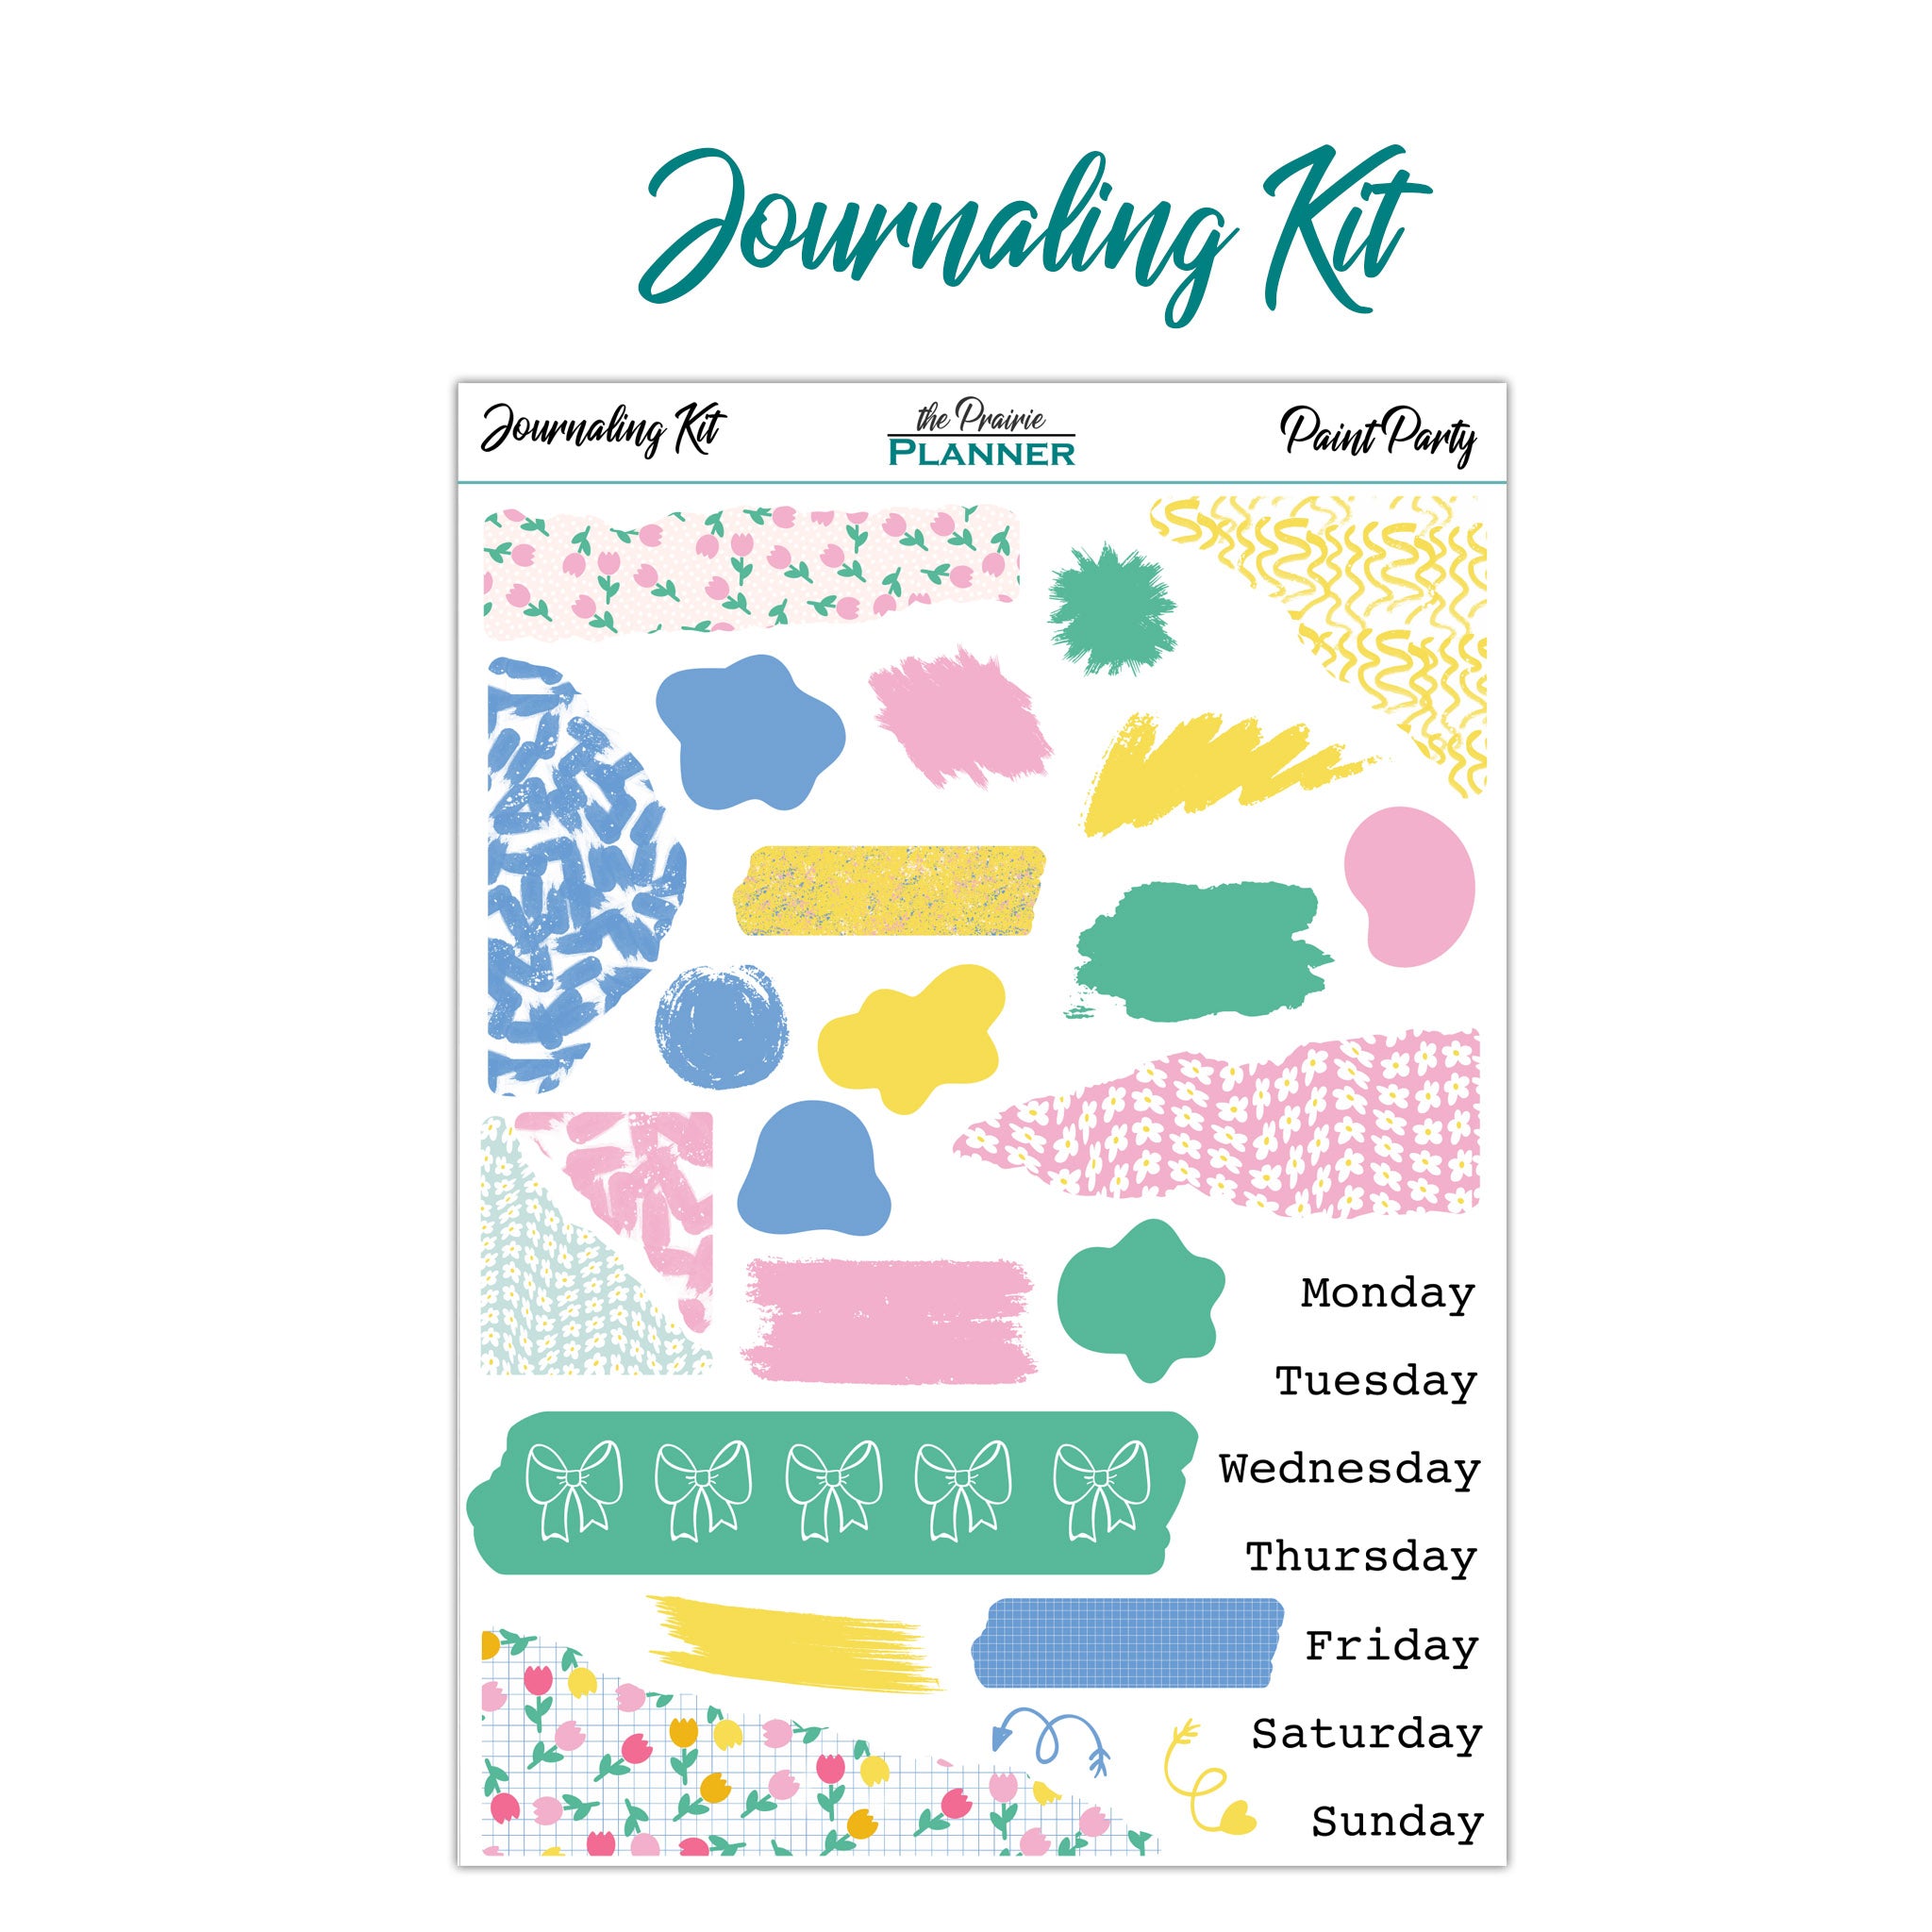 Paint Party - Journaling Kit